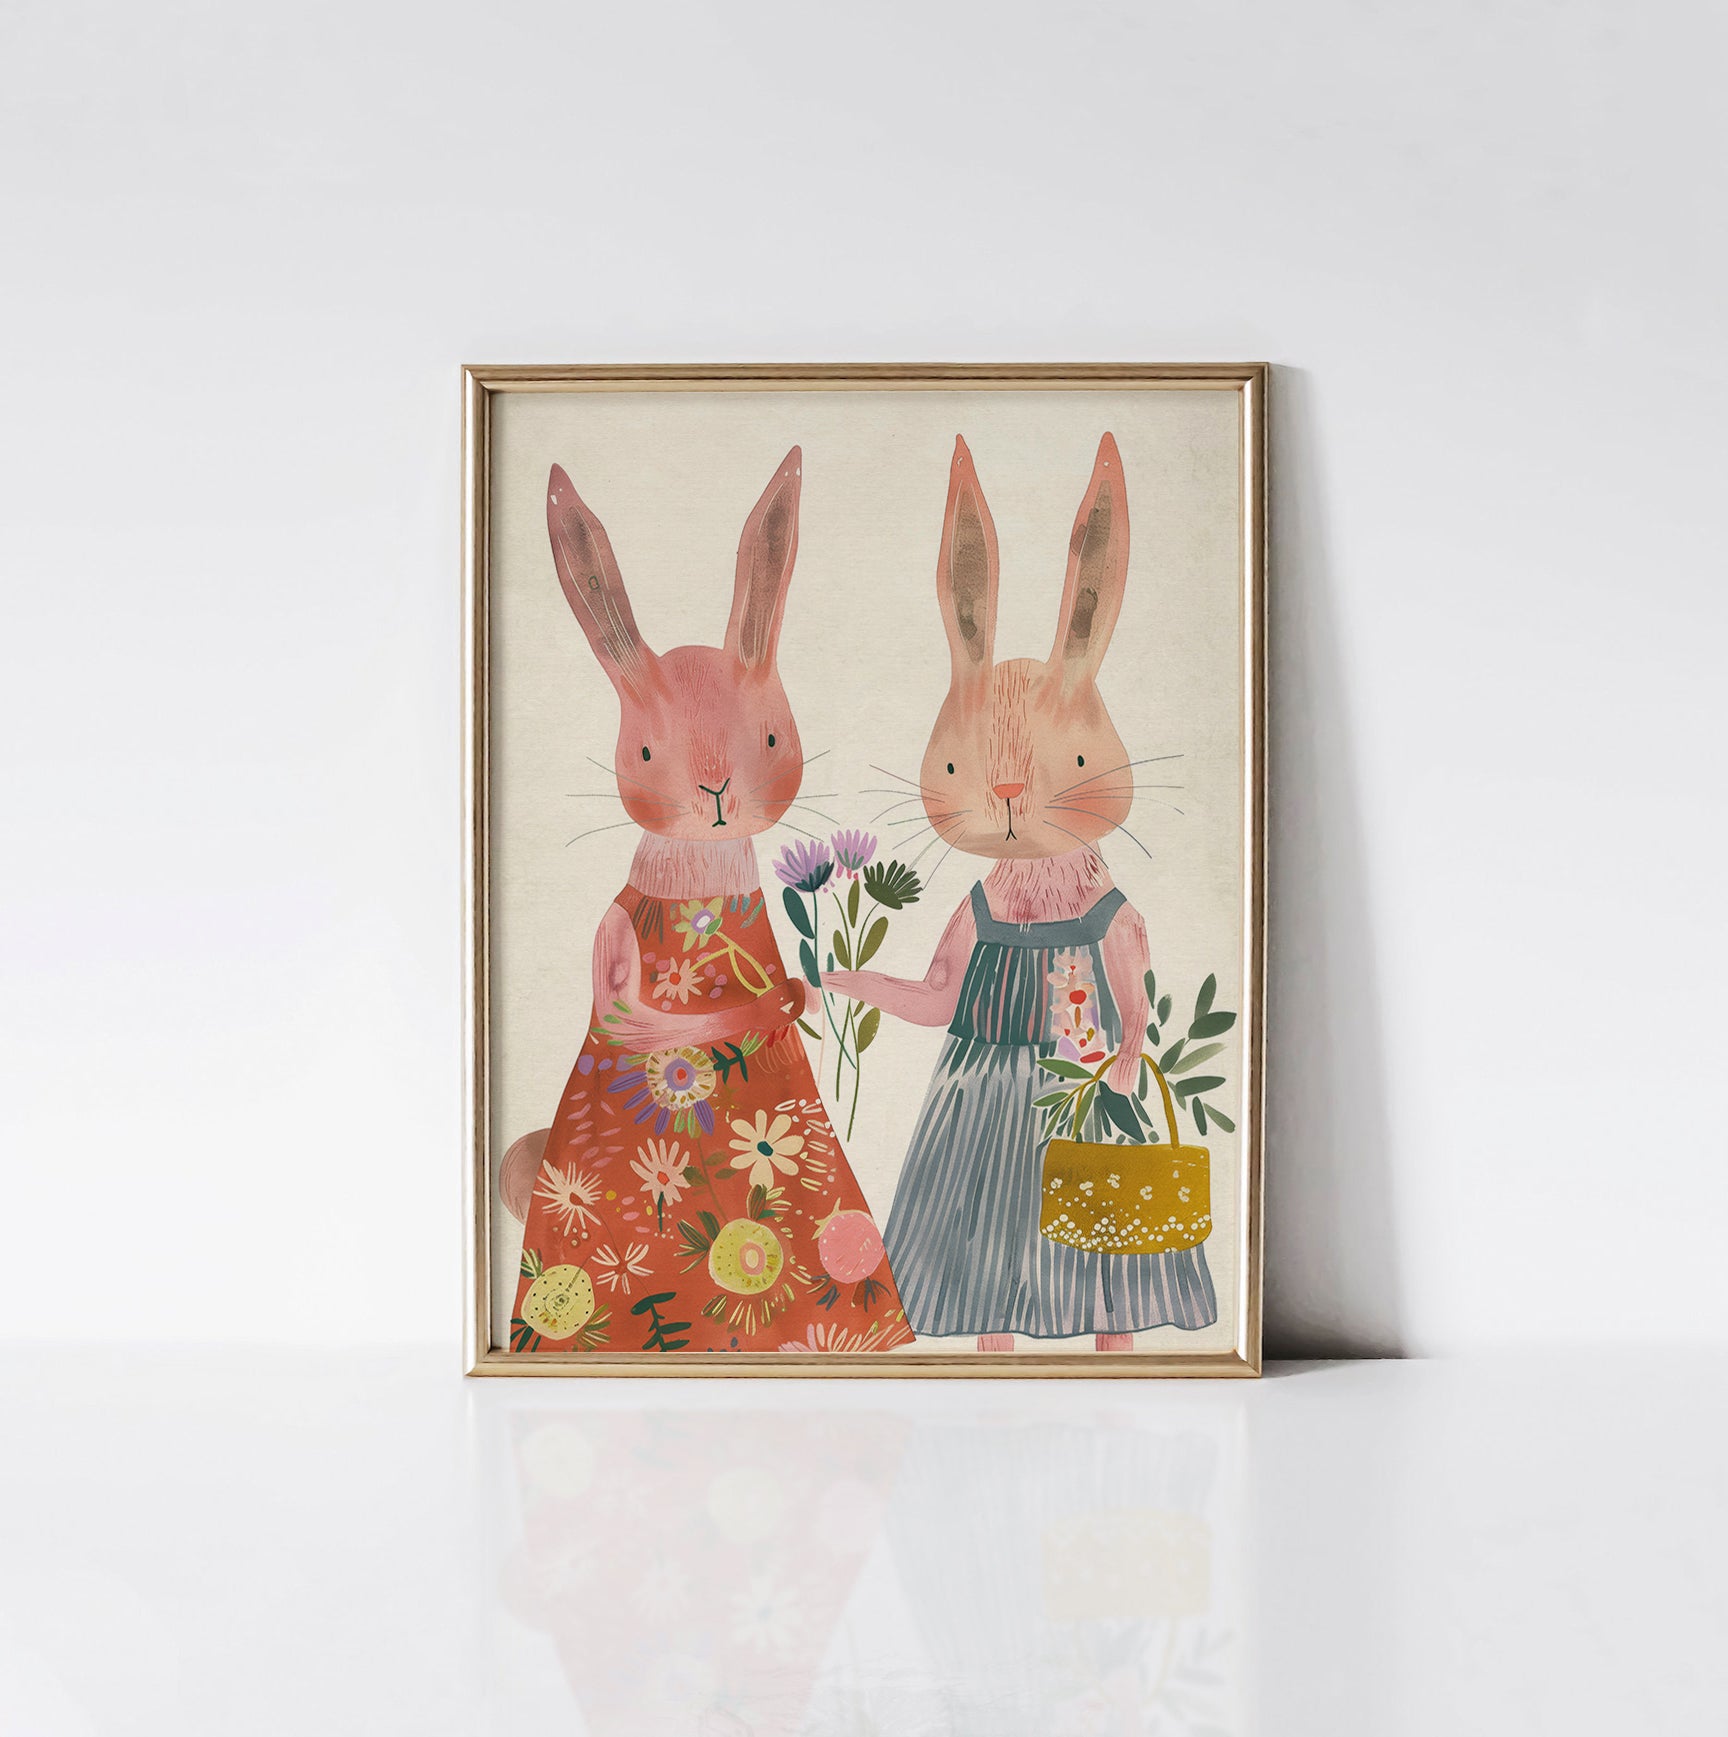 Bunny Friends art print displayed in a sleek gold frame, featuring two adorable bunnies in pastel colors, holding flowers and a basket